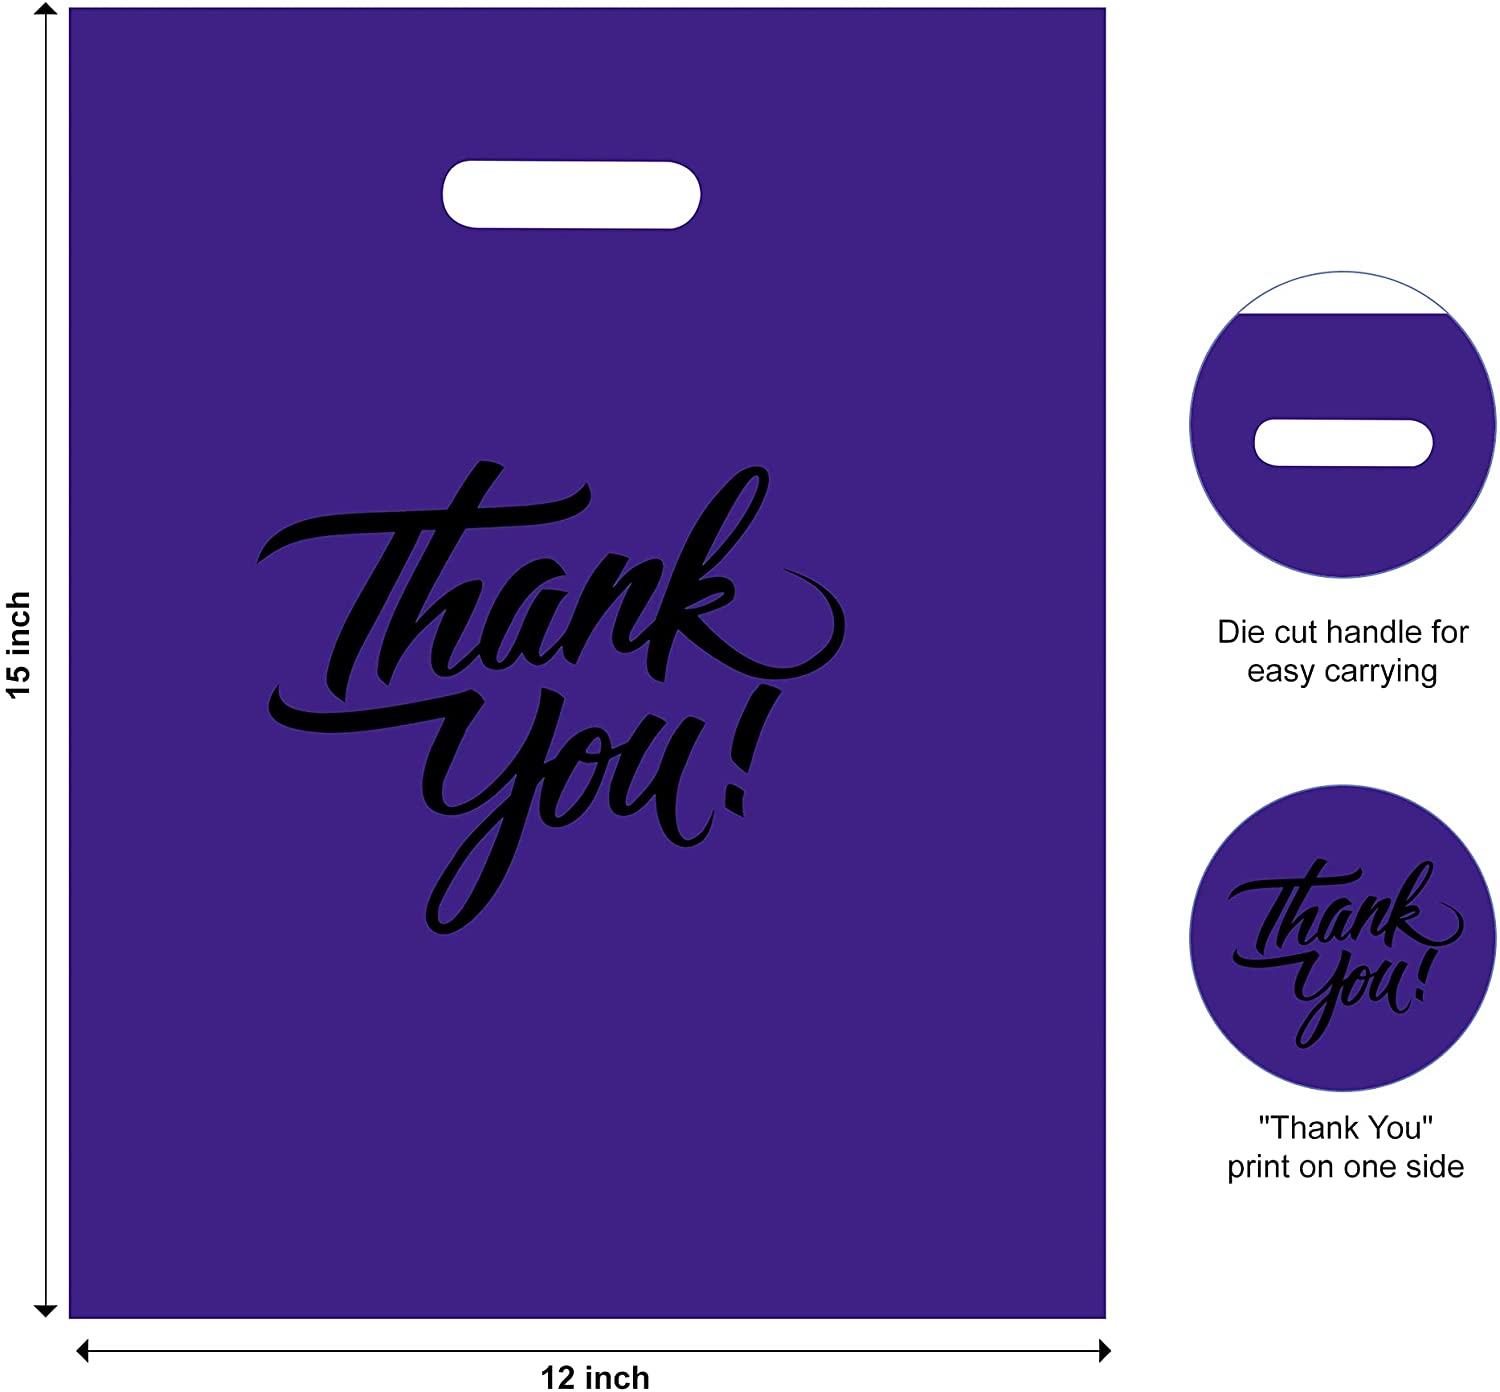 purple thank you bag with die cut handle and size mentioned